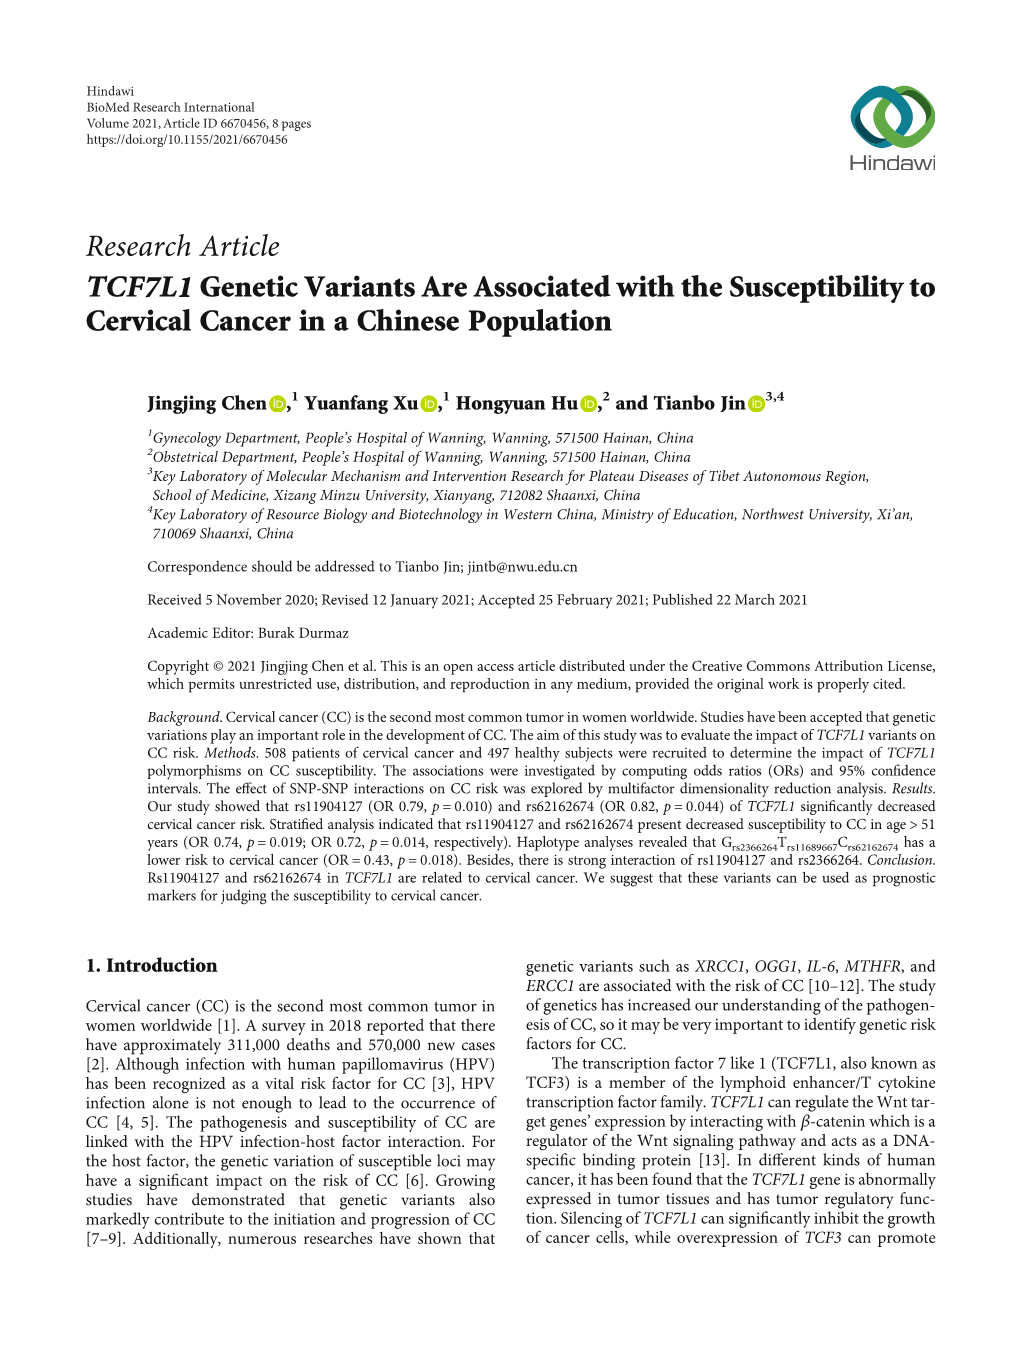 TCF7L1 Genetic Variants Are Associated with the Susceptibility to Cervical Cancer in a Chinese Population